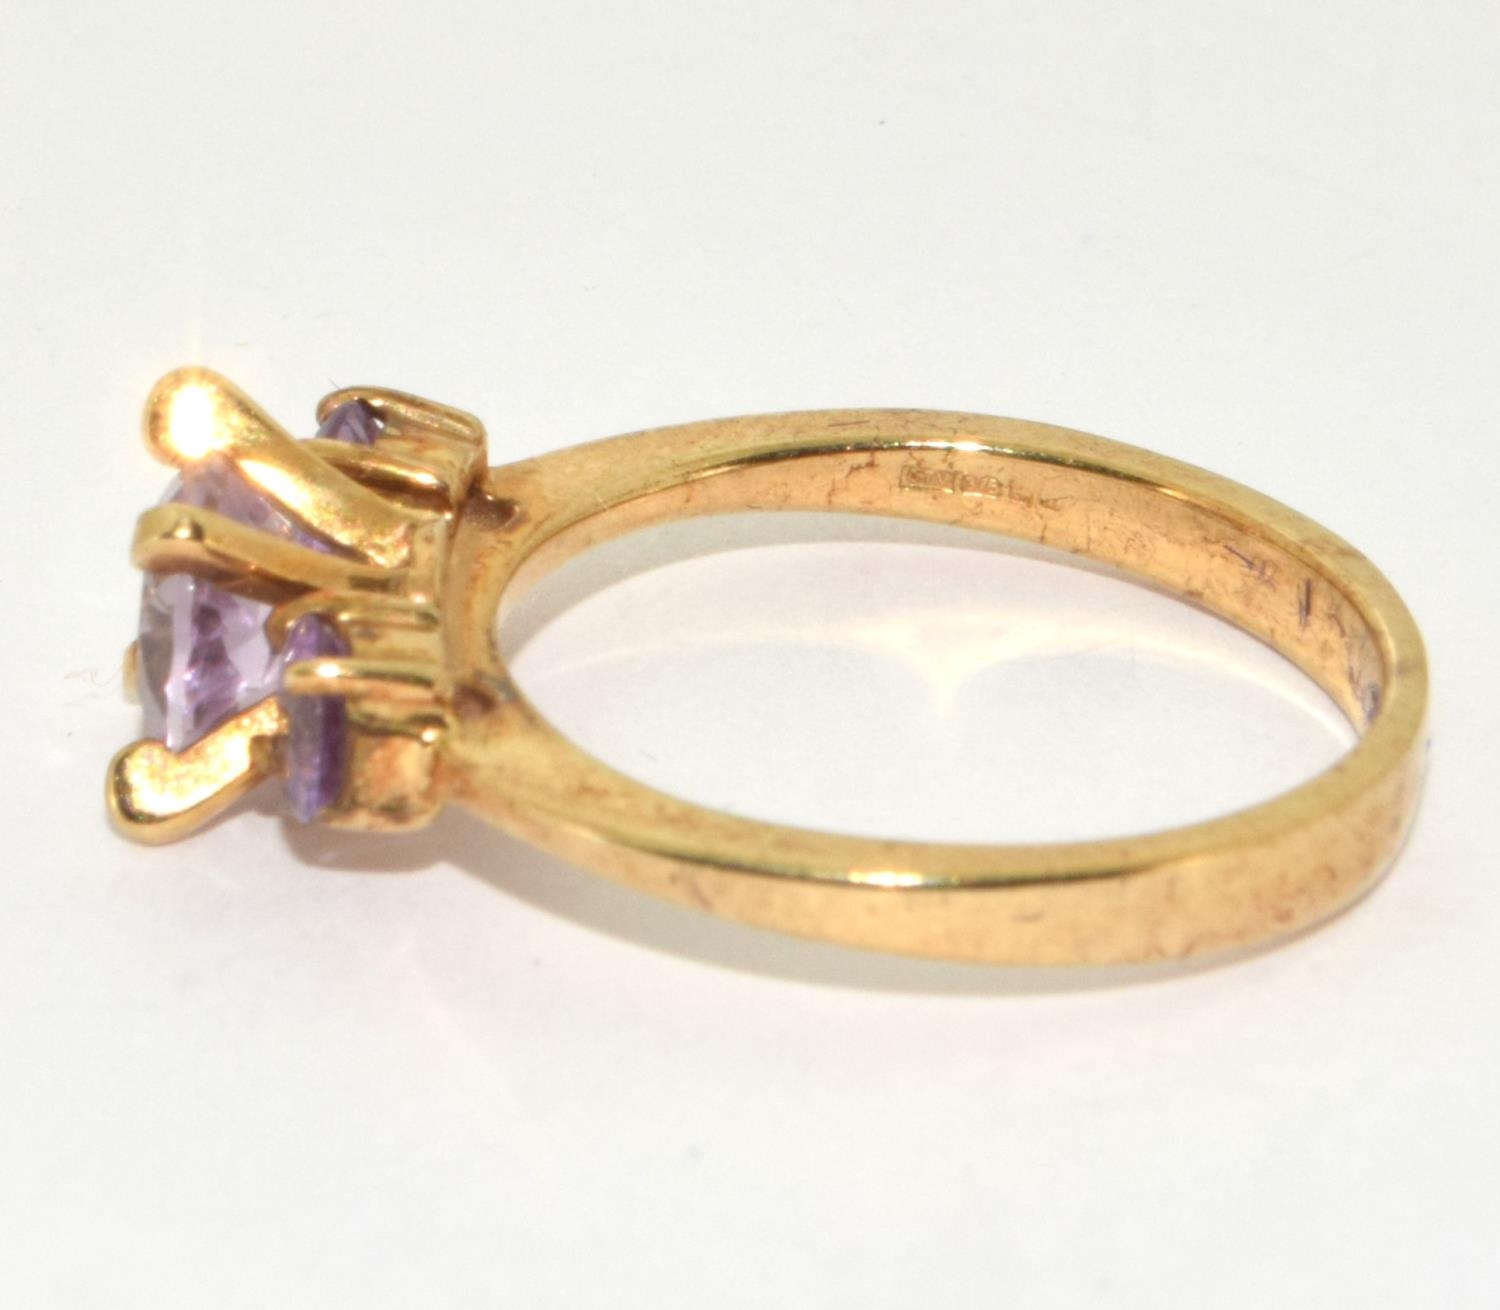 9ct gold ladies 3 stone Amethyst and tanzanite ring size N - Image 2 of 5